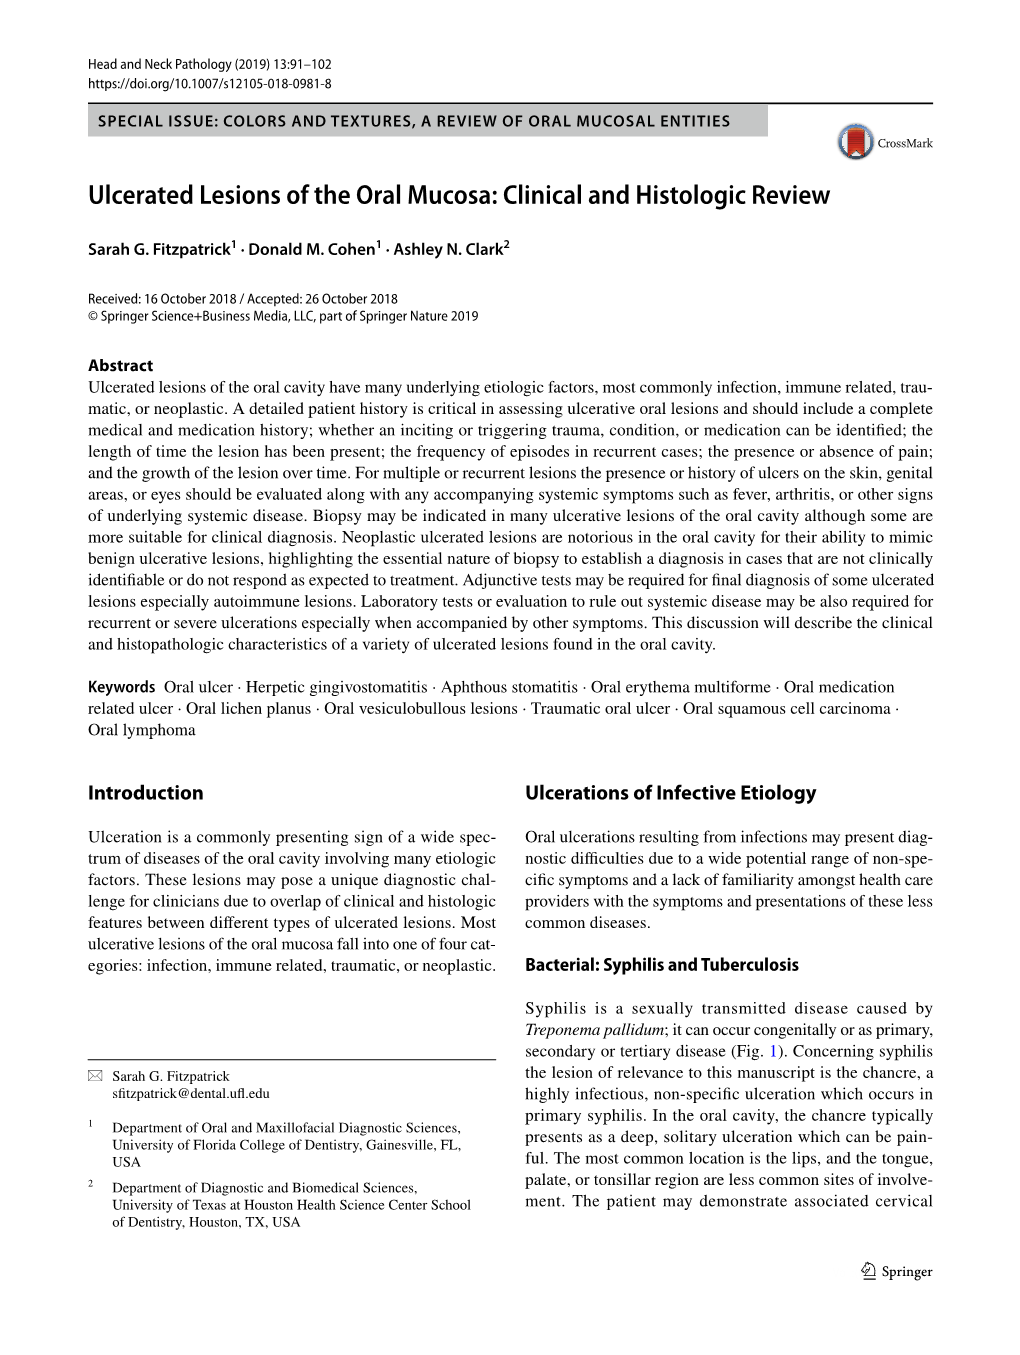 Ulcerated Lesions of the Oral Mucosa: Clinical and Histologic Review